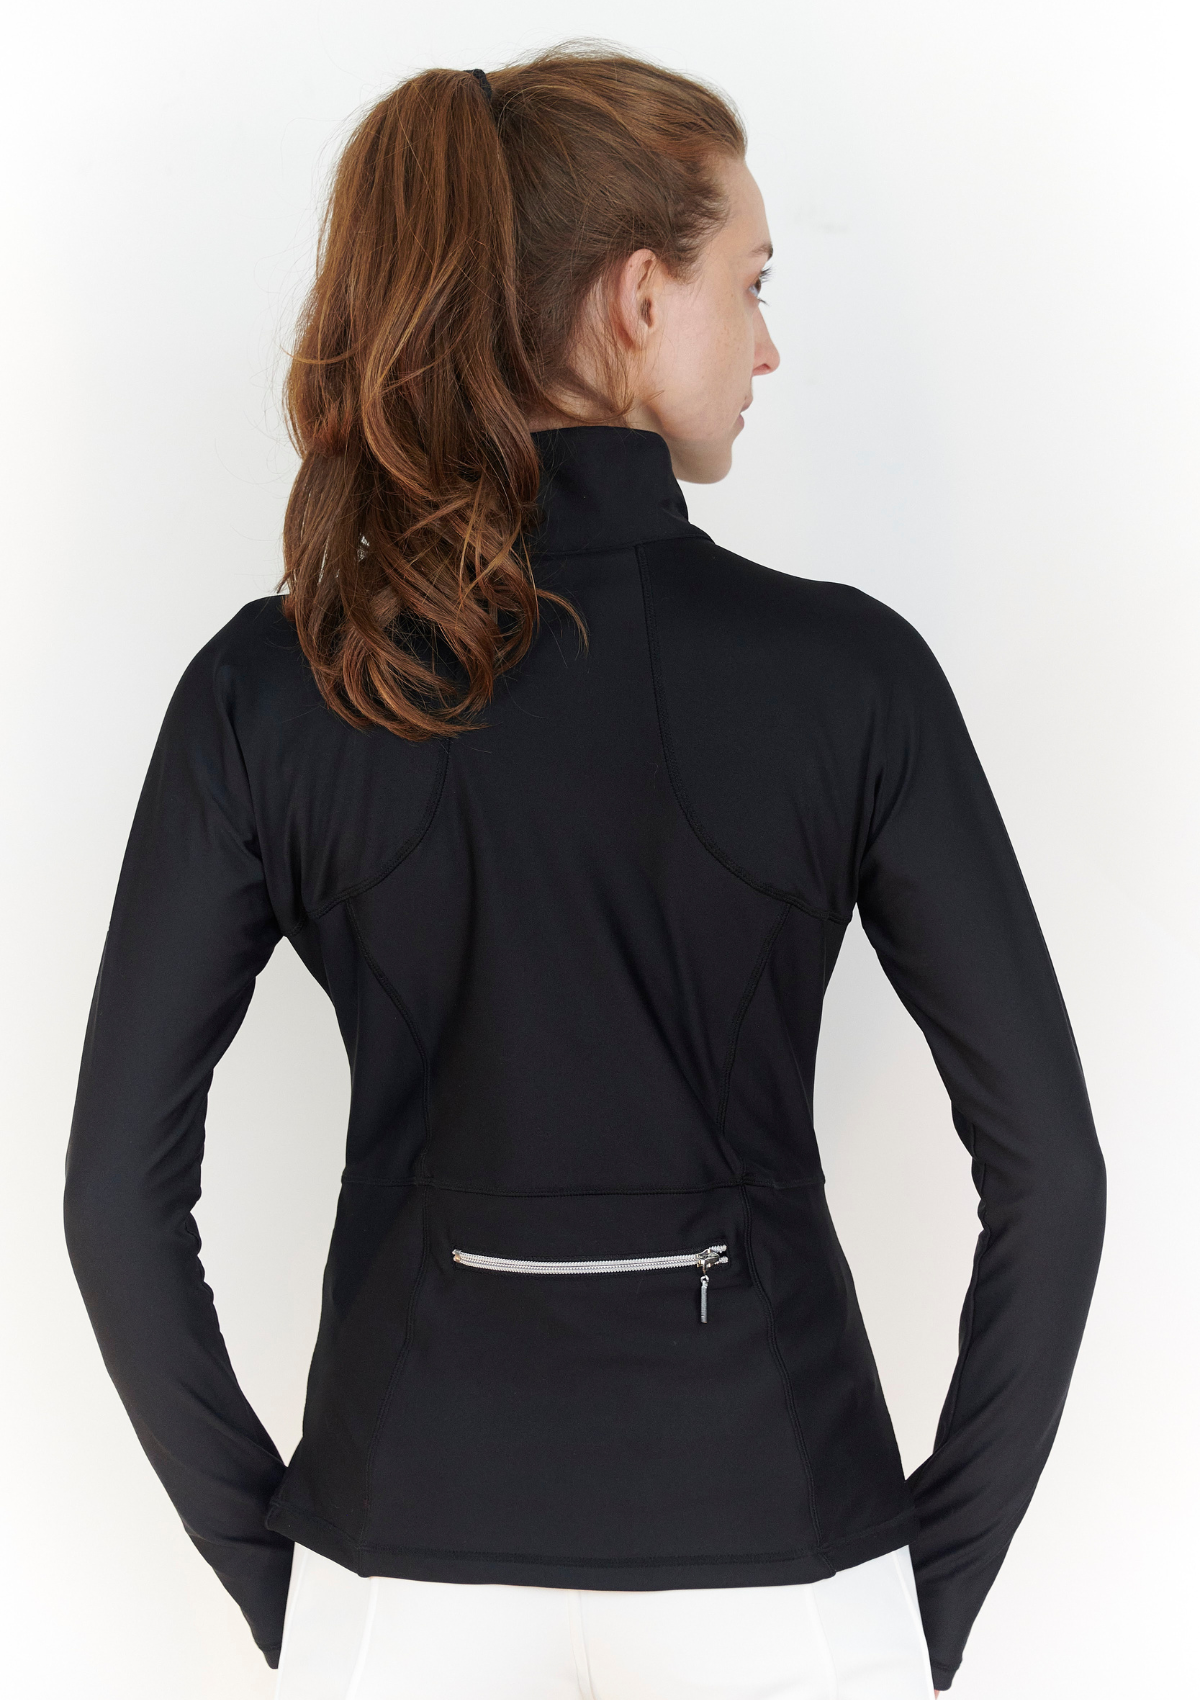 backview of women's athletic jacket with silver zipper across back